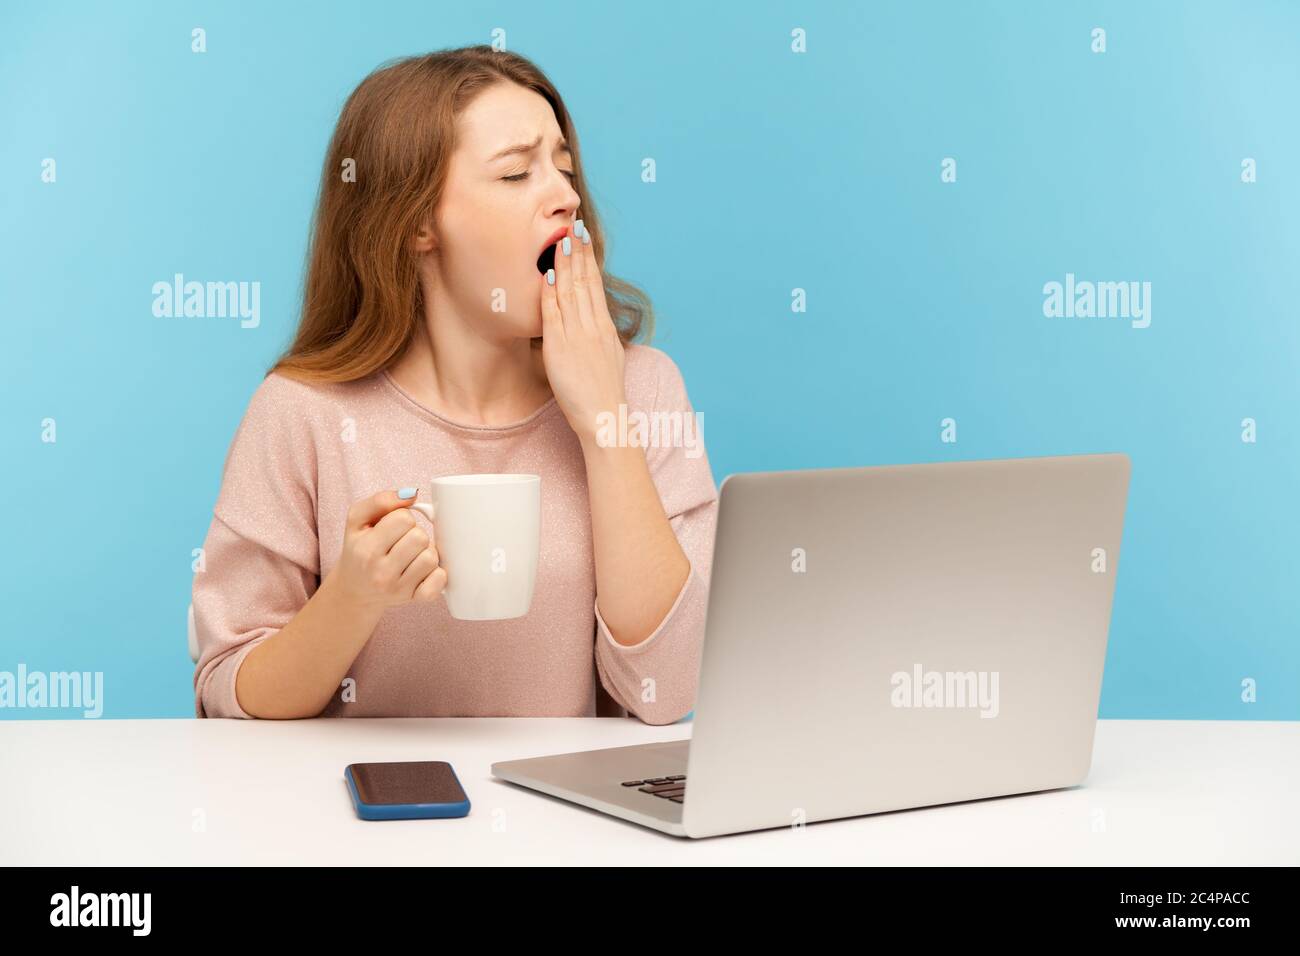 Exhausted drowsy woman sitting at workplace with laptop and yawning feeling sleepy, holding cup coffee to wake up, lazy inefficient employee at work. Stock Photo